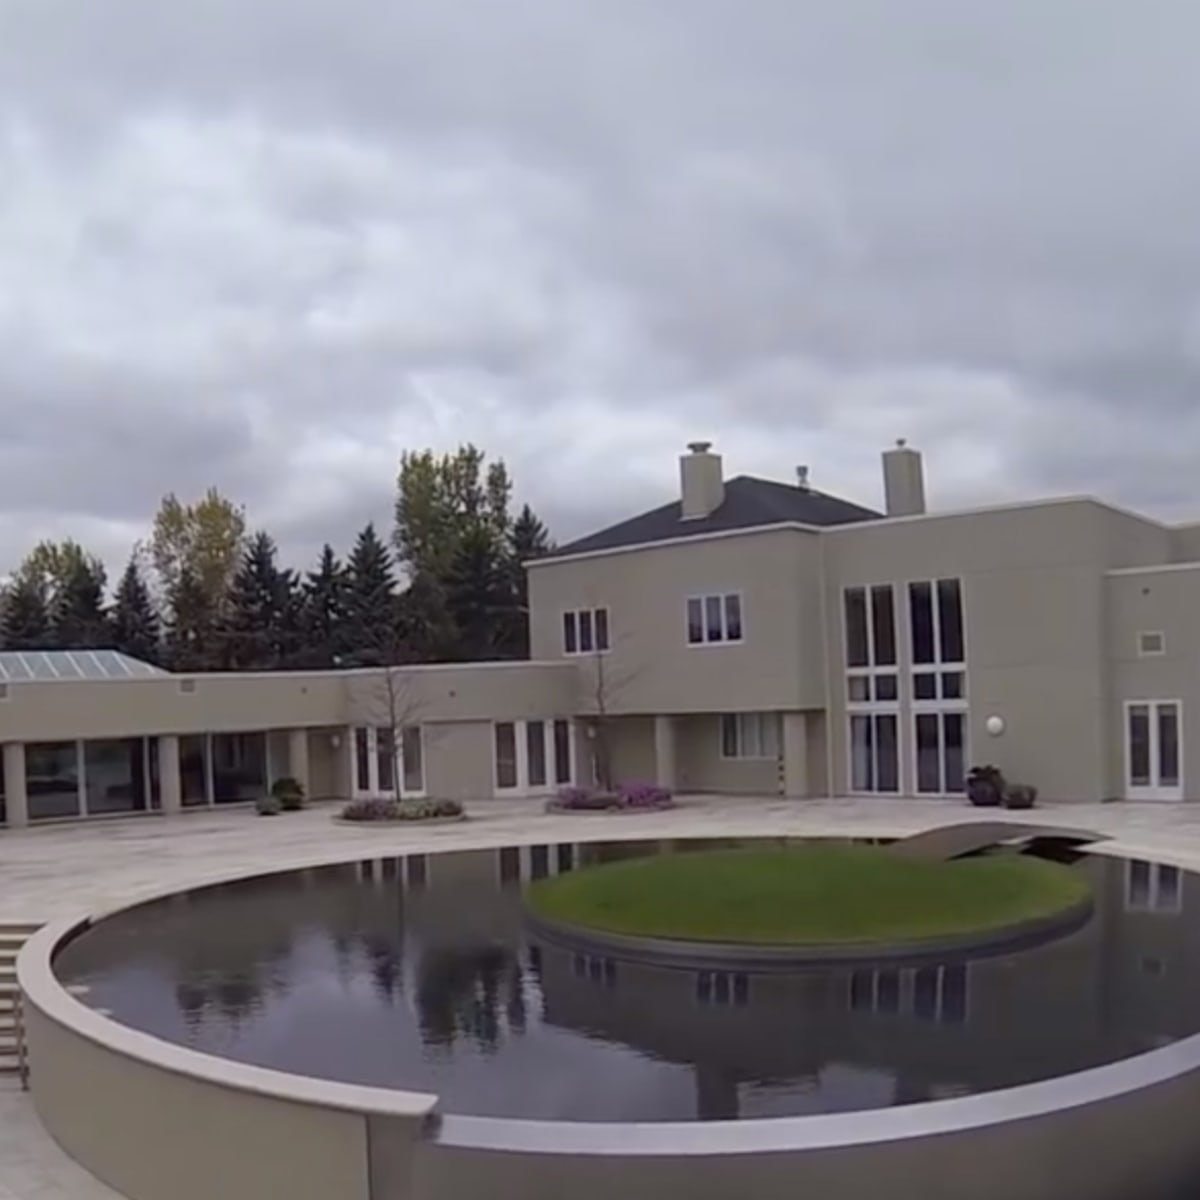 Jordan's house in Chicago for since 2012 (photos, video) - Sports Illustrated